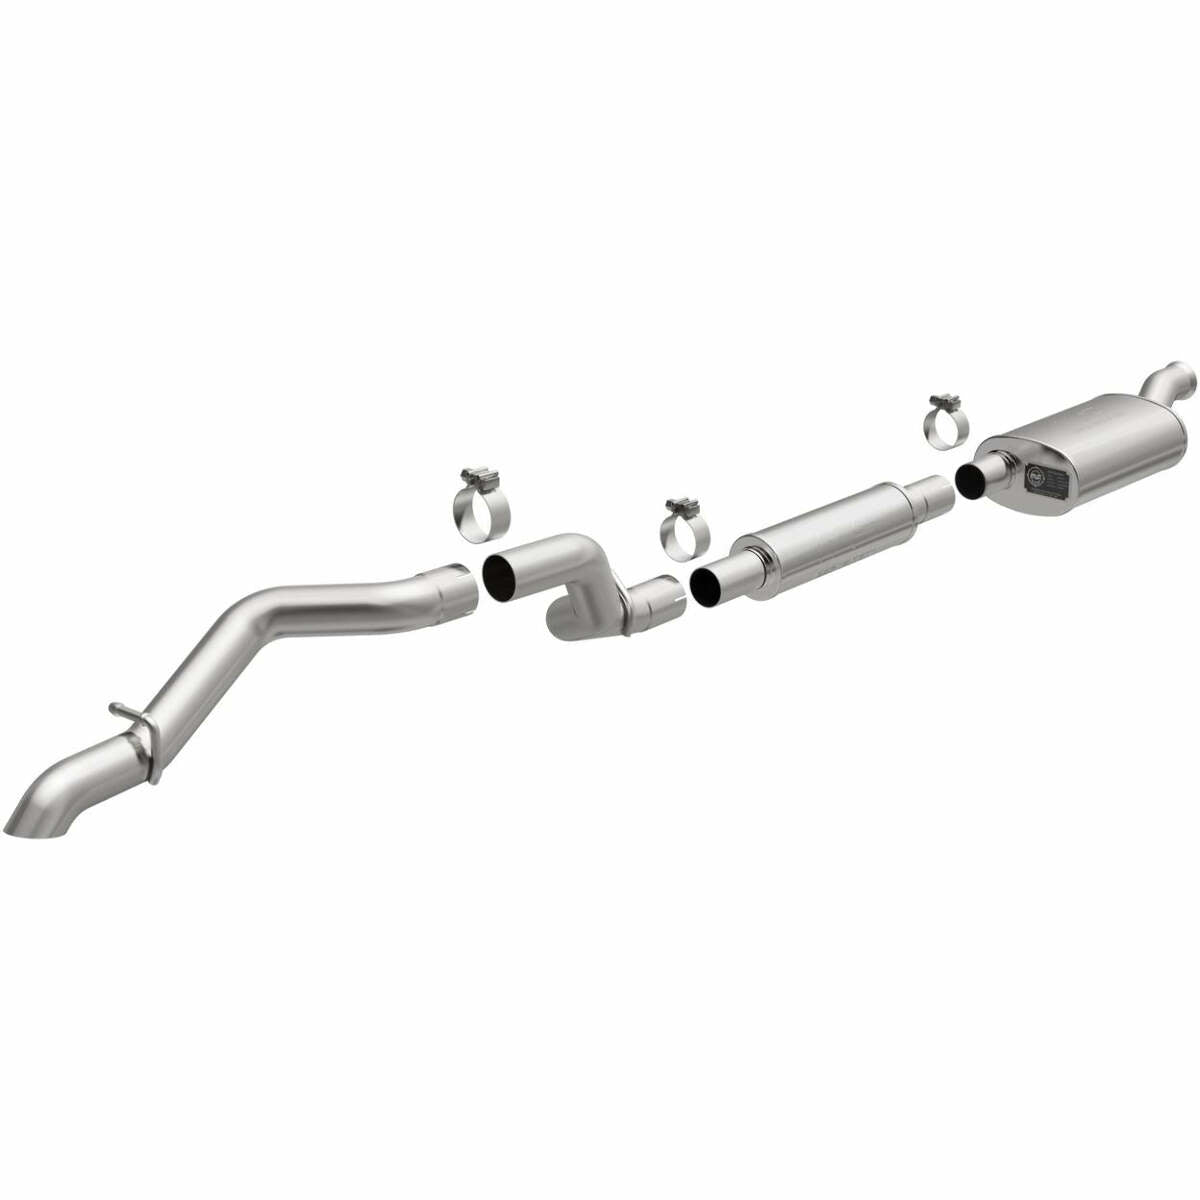 2018-22 Jeep Wrangler Overland Series Performance Exhaust System 19592 Magnaflow